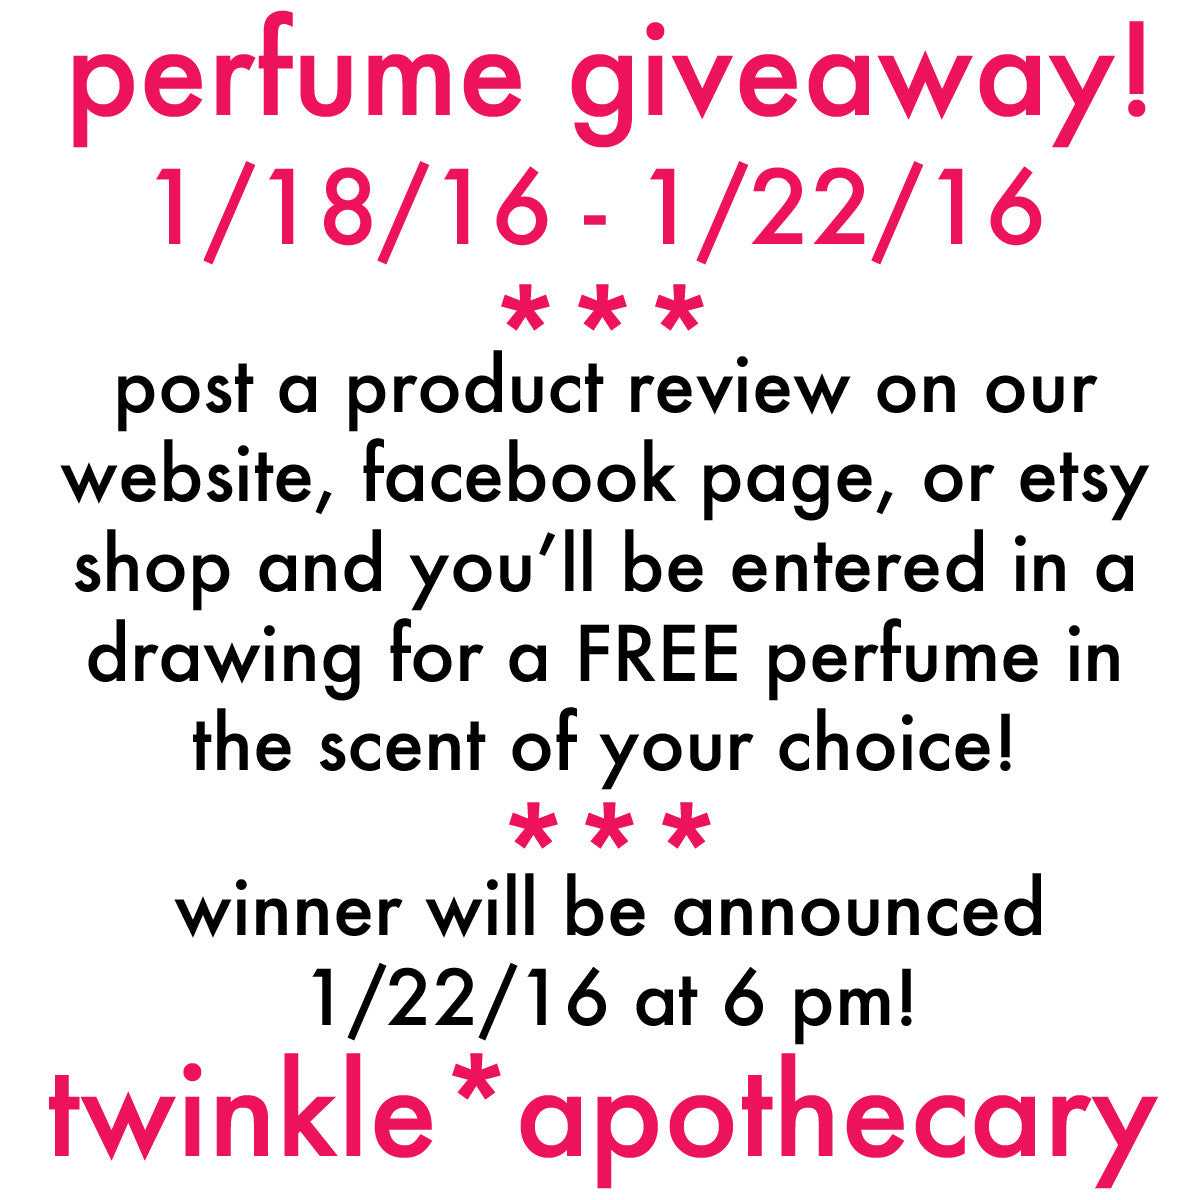 We're Giving Away a Free Perfume This Week!